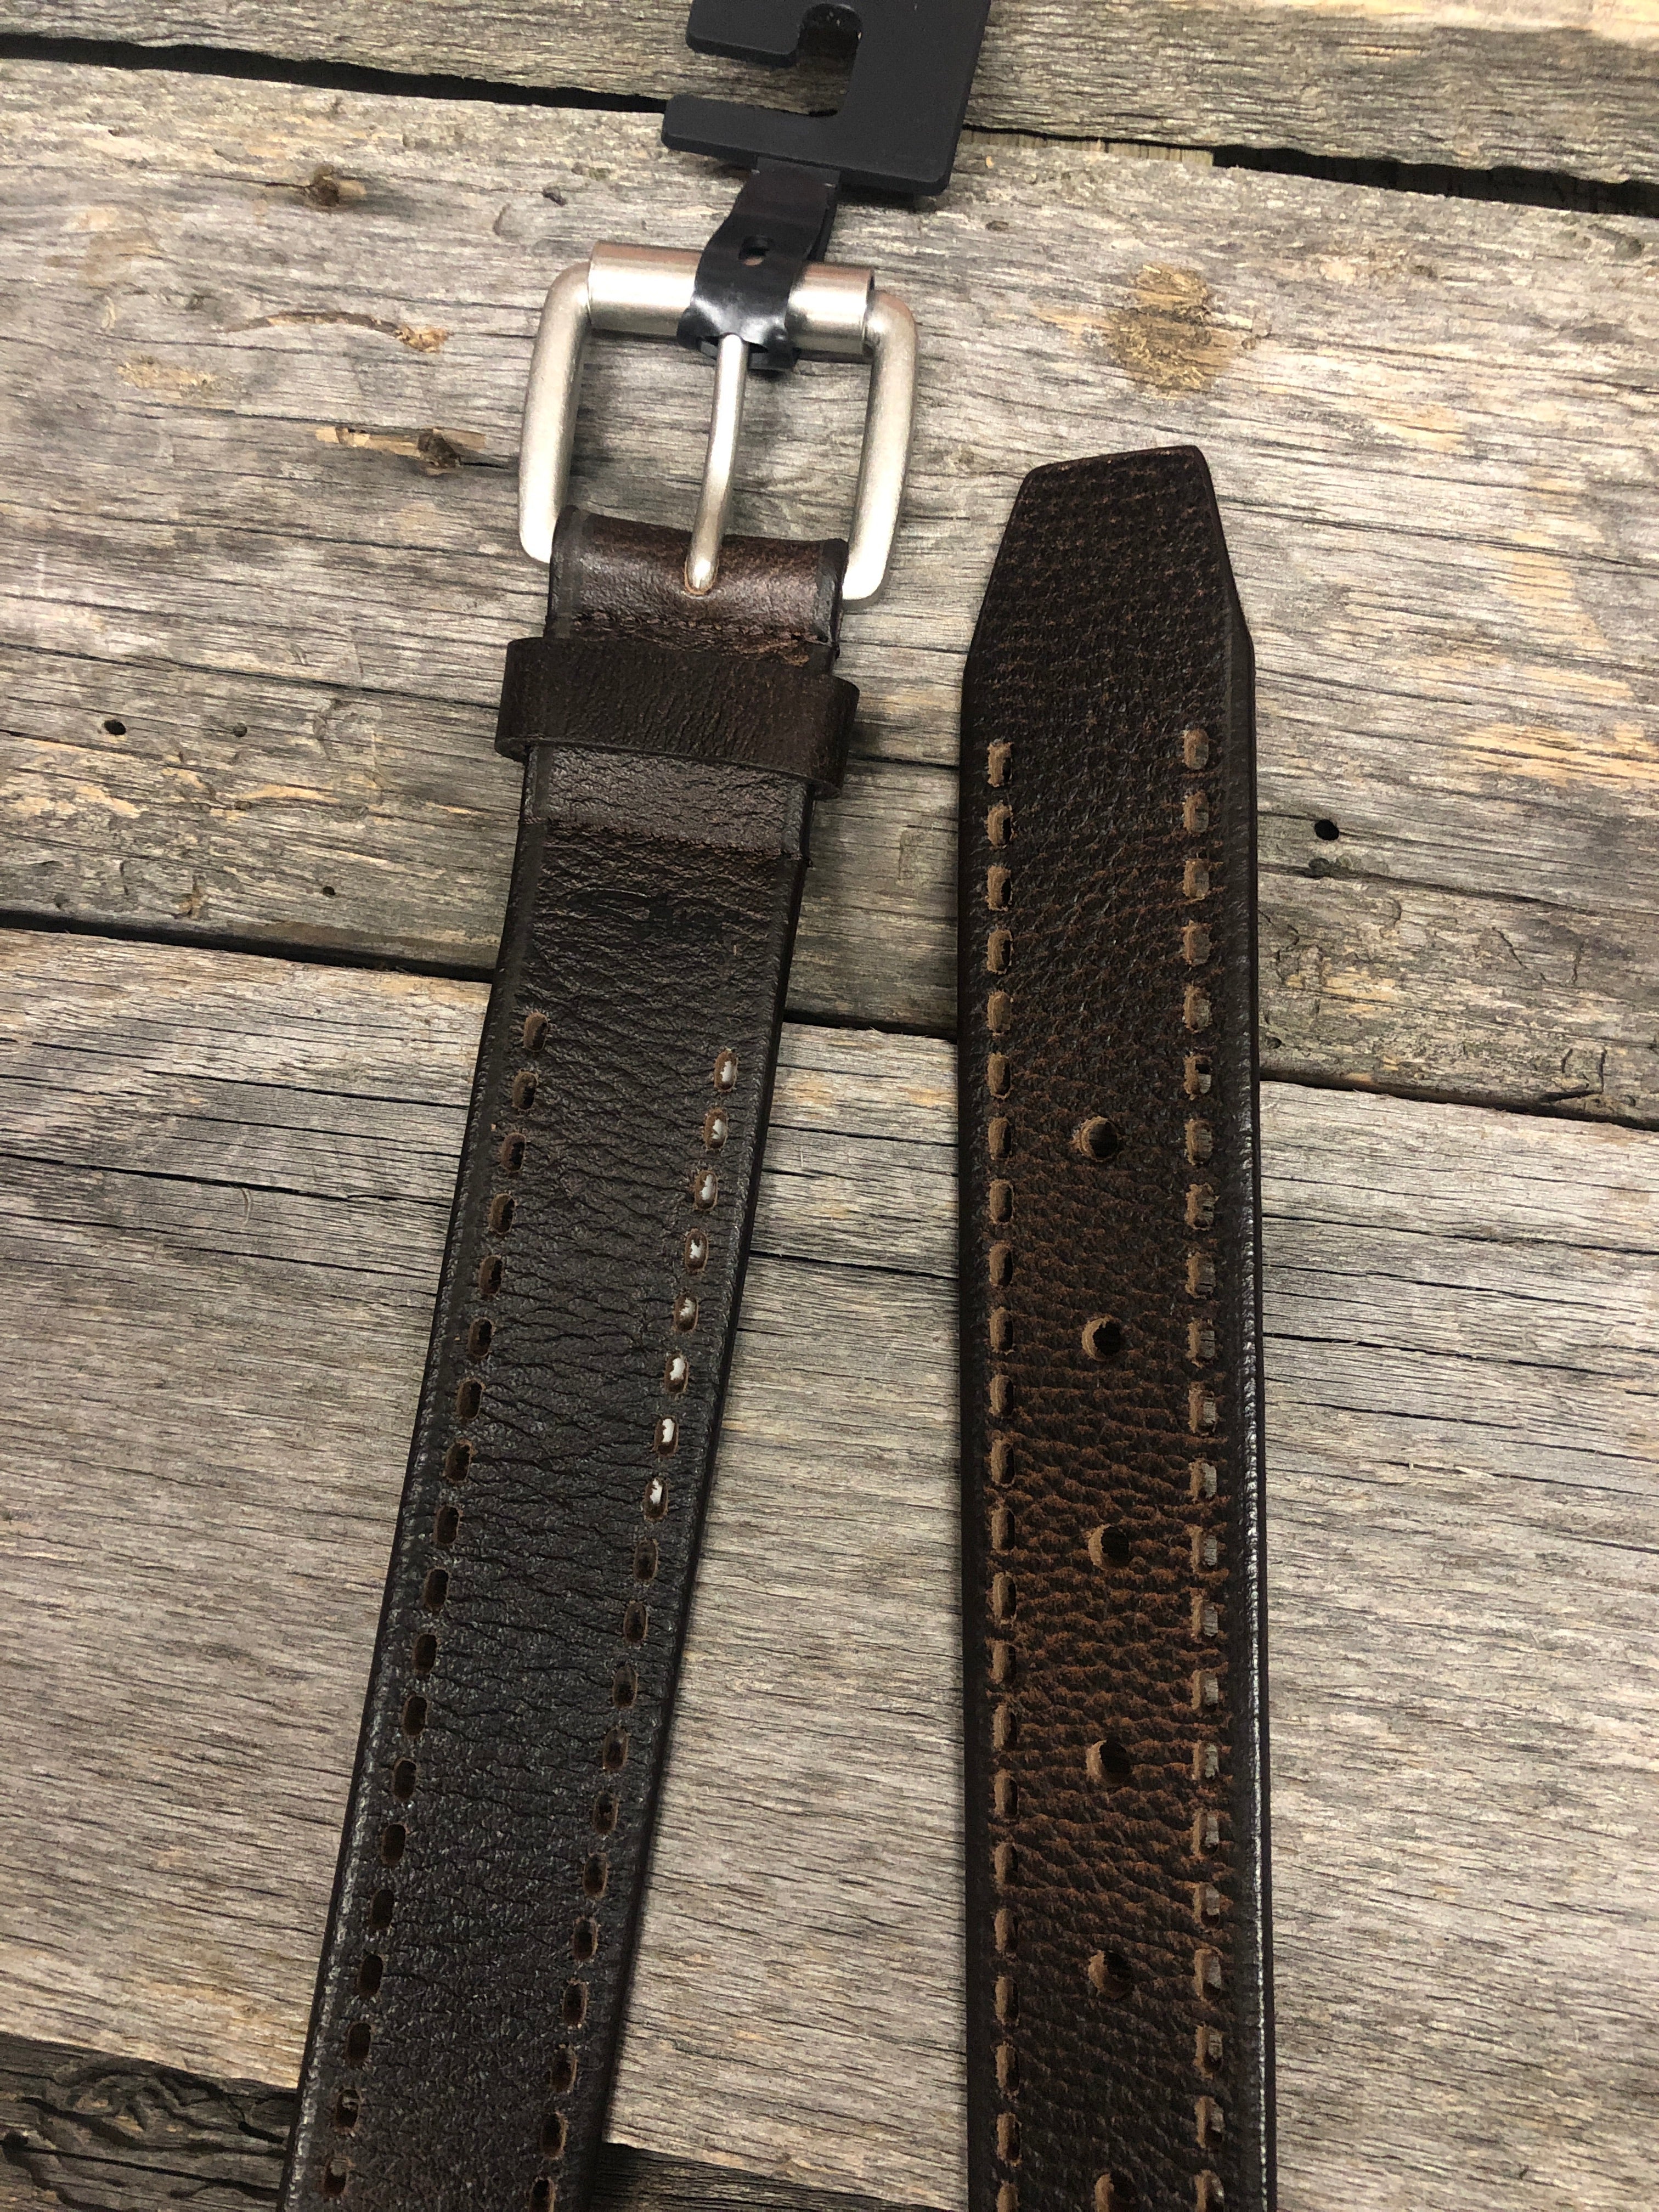 SILVER JEANS Rustic Brown Belt Perforated